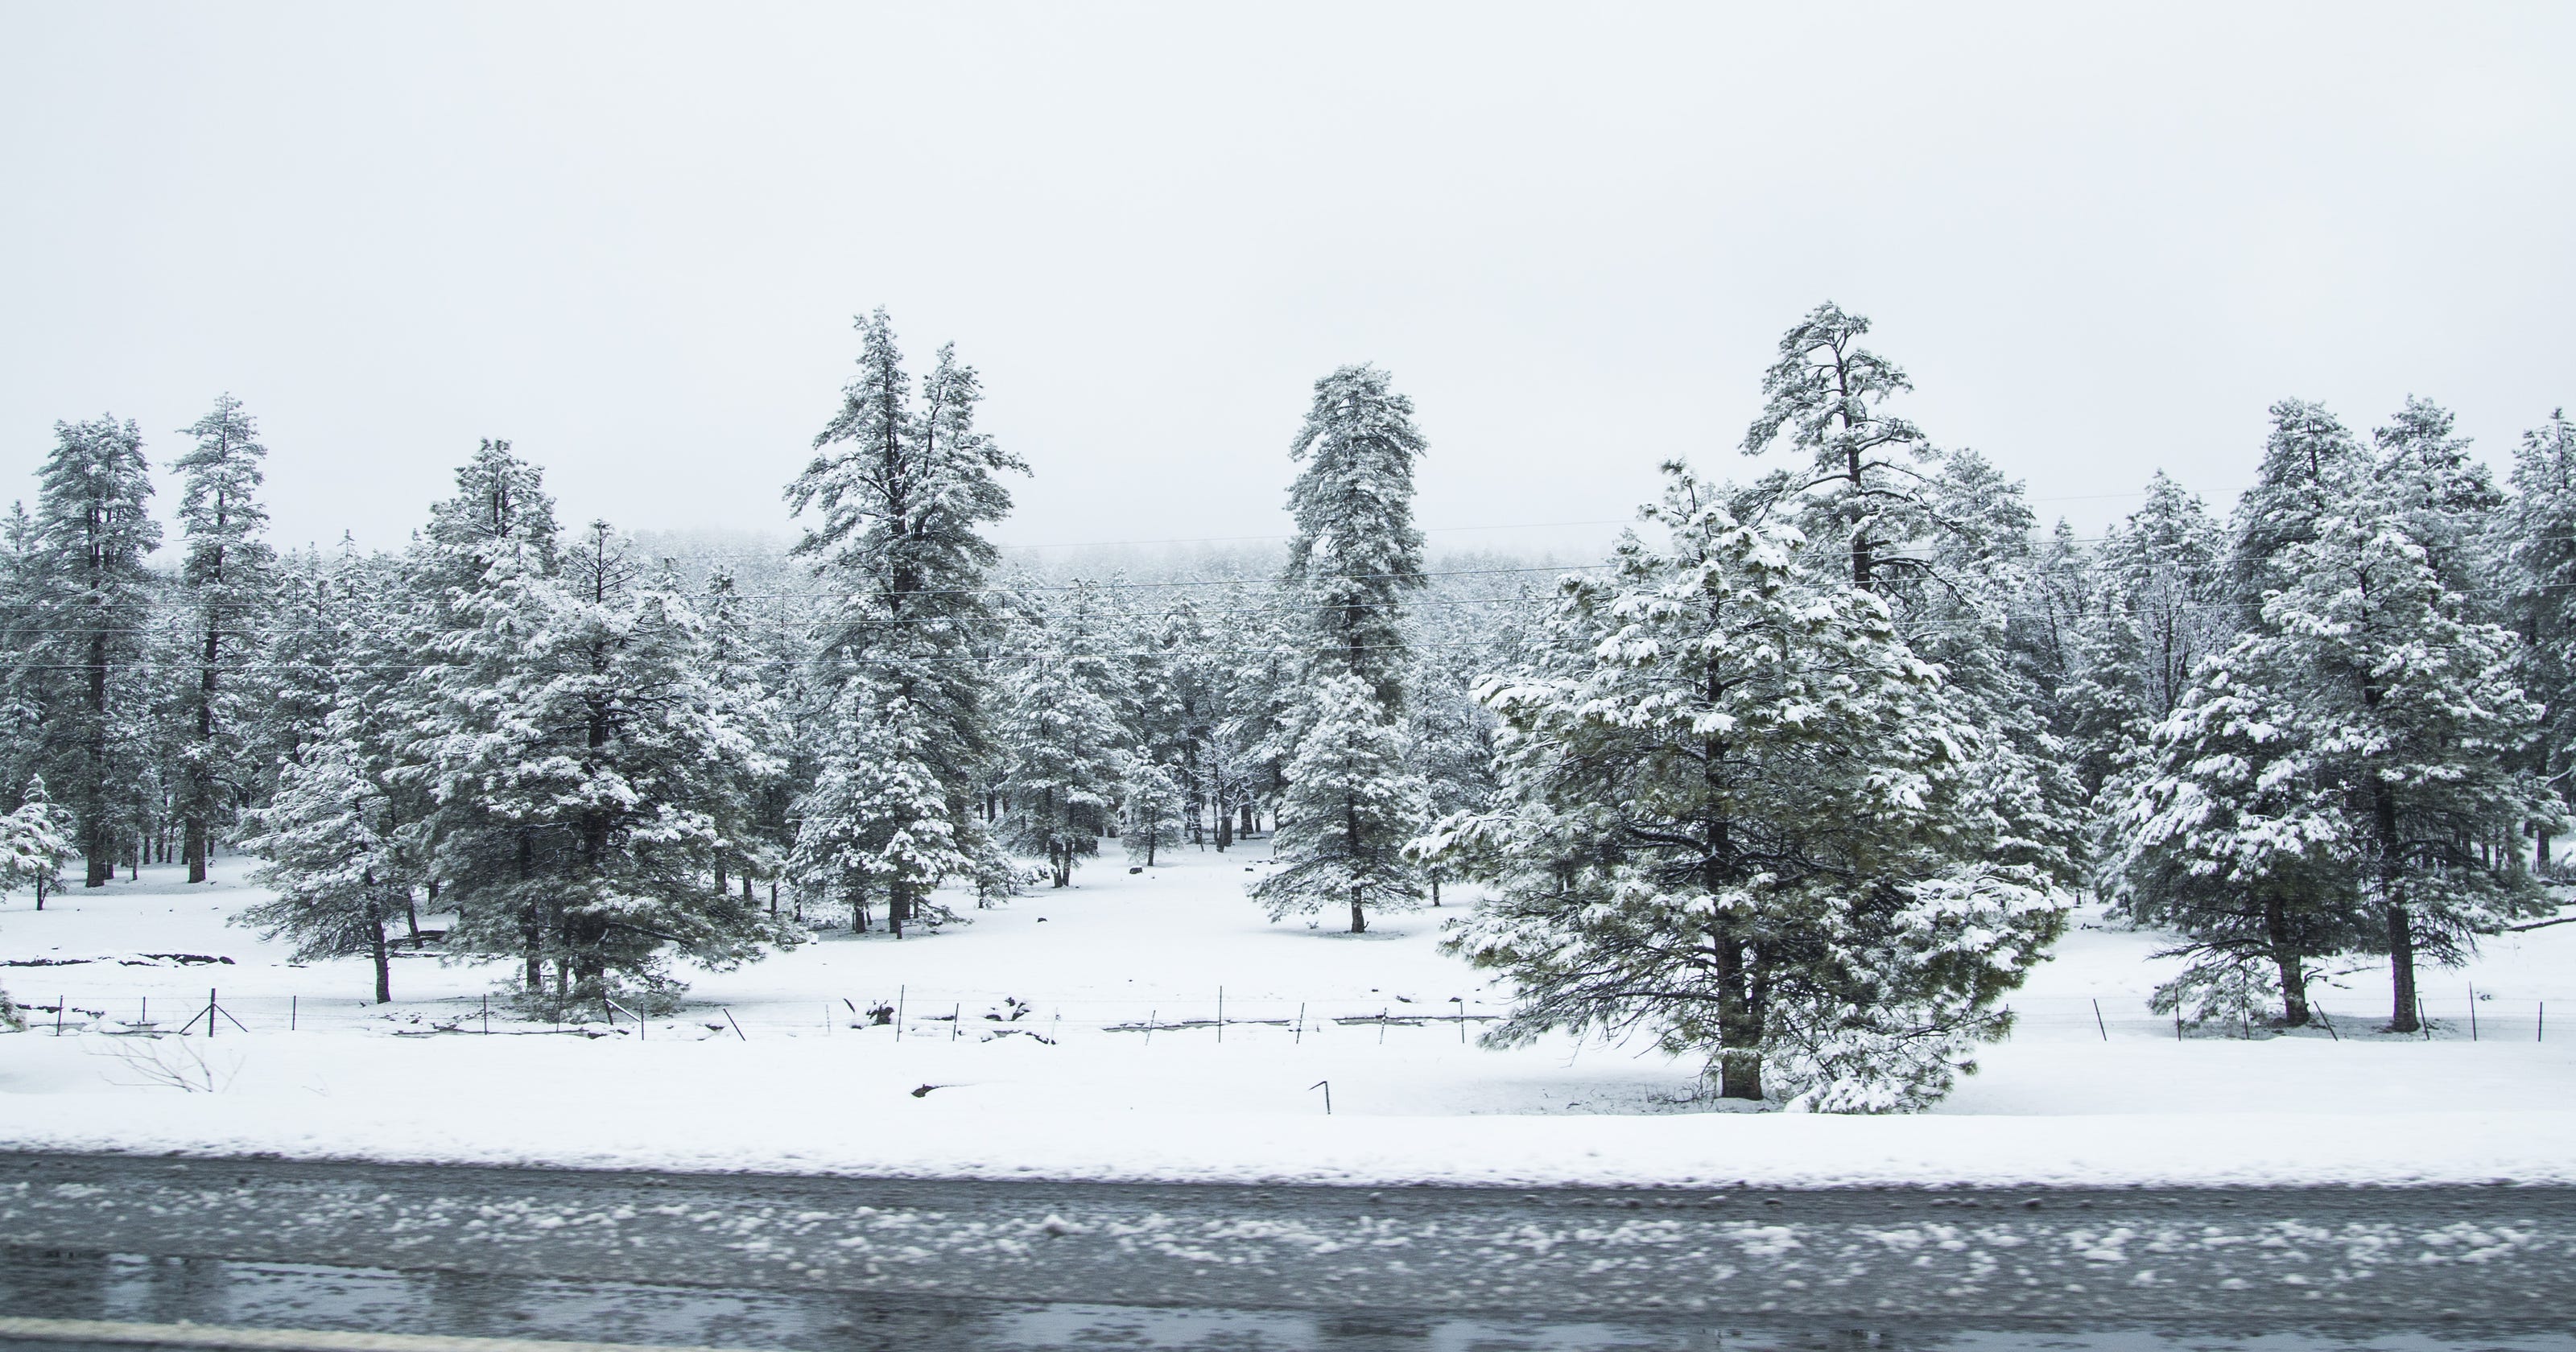 Bundle up Flagstaff, snow and cold weather is on its way